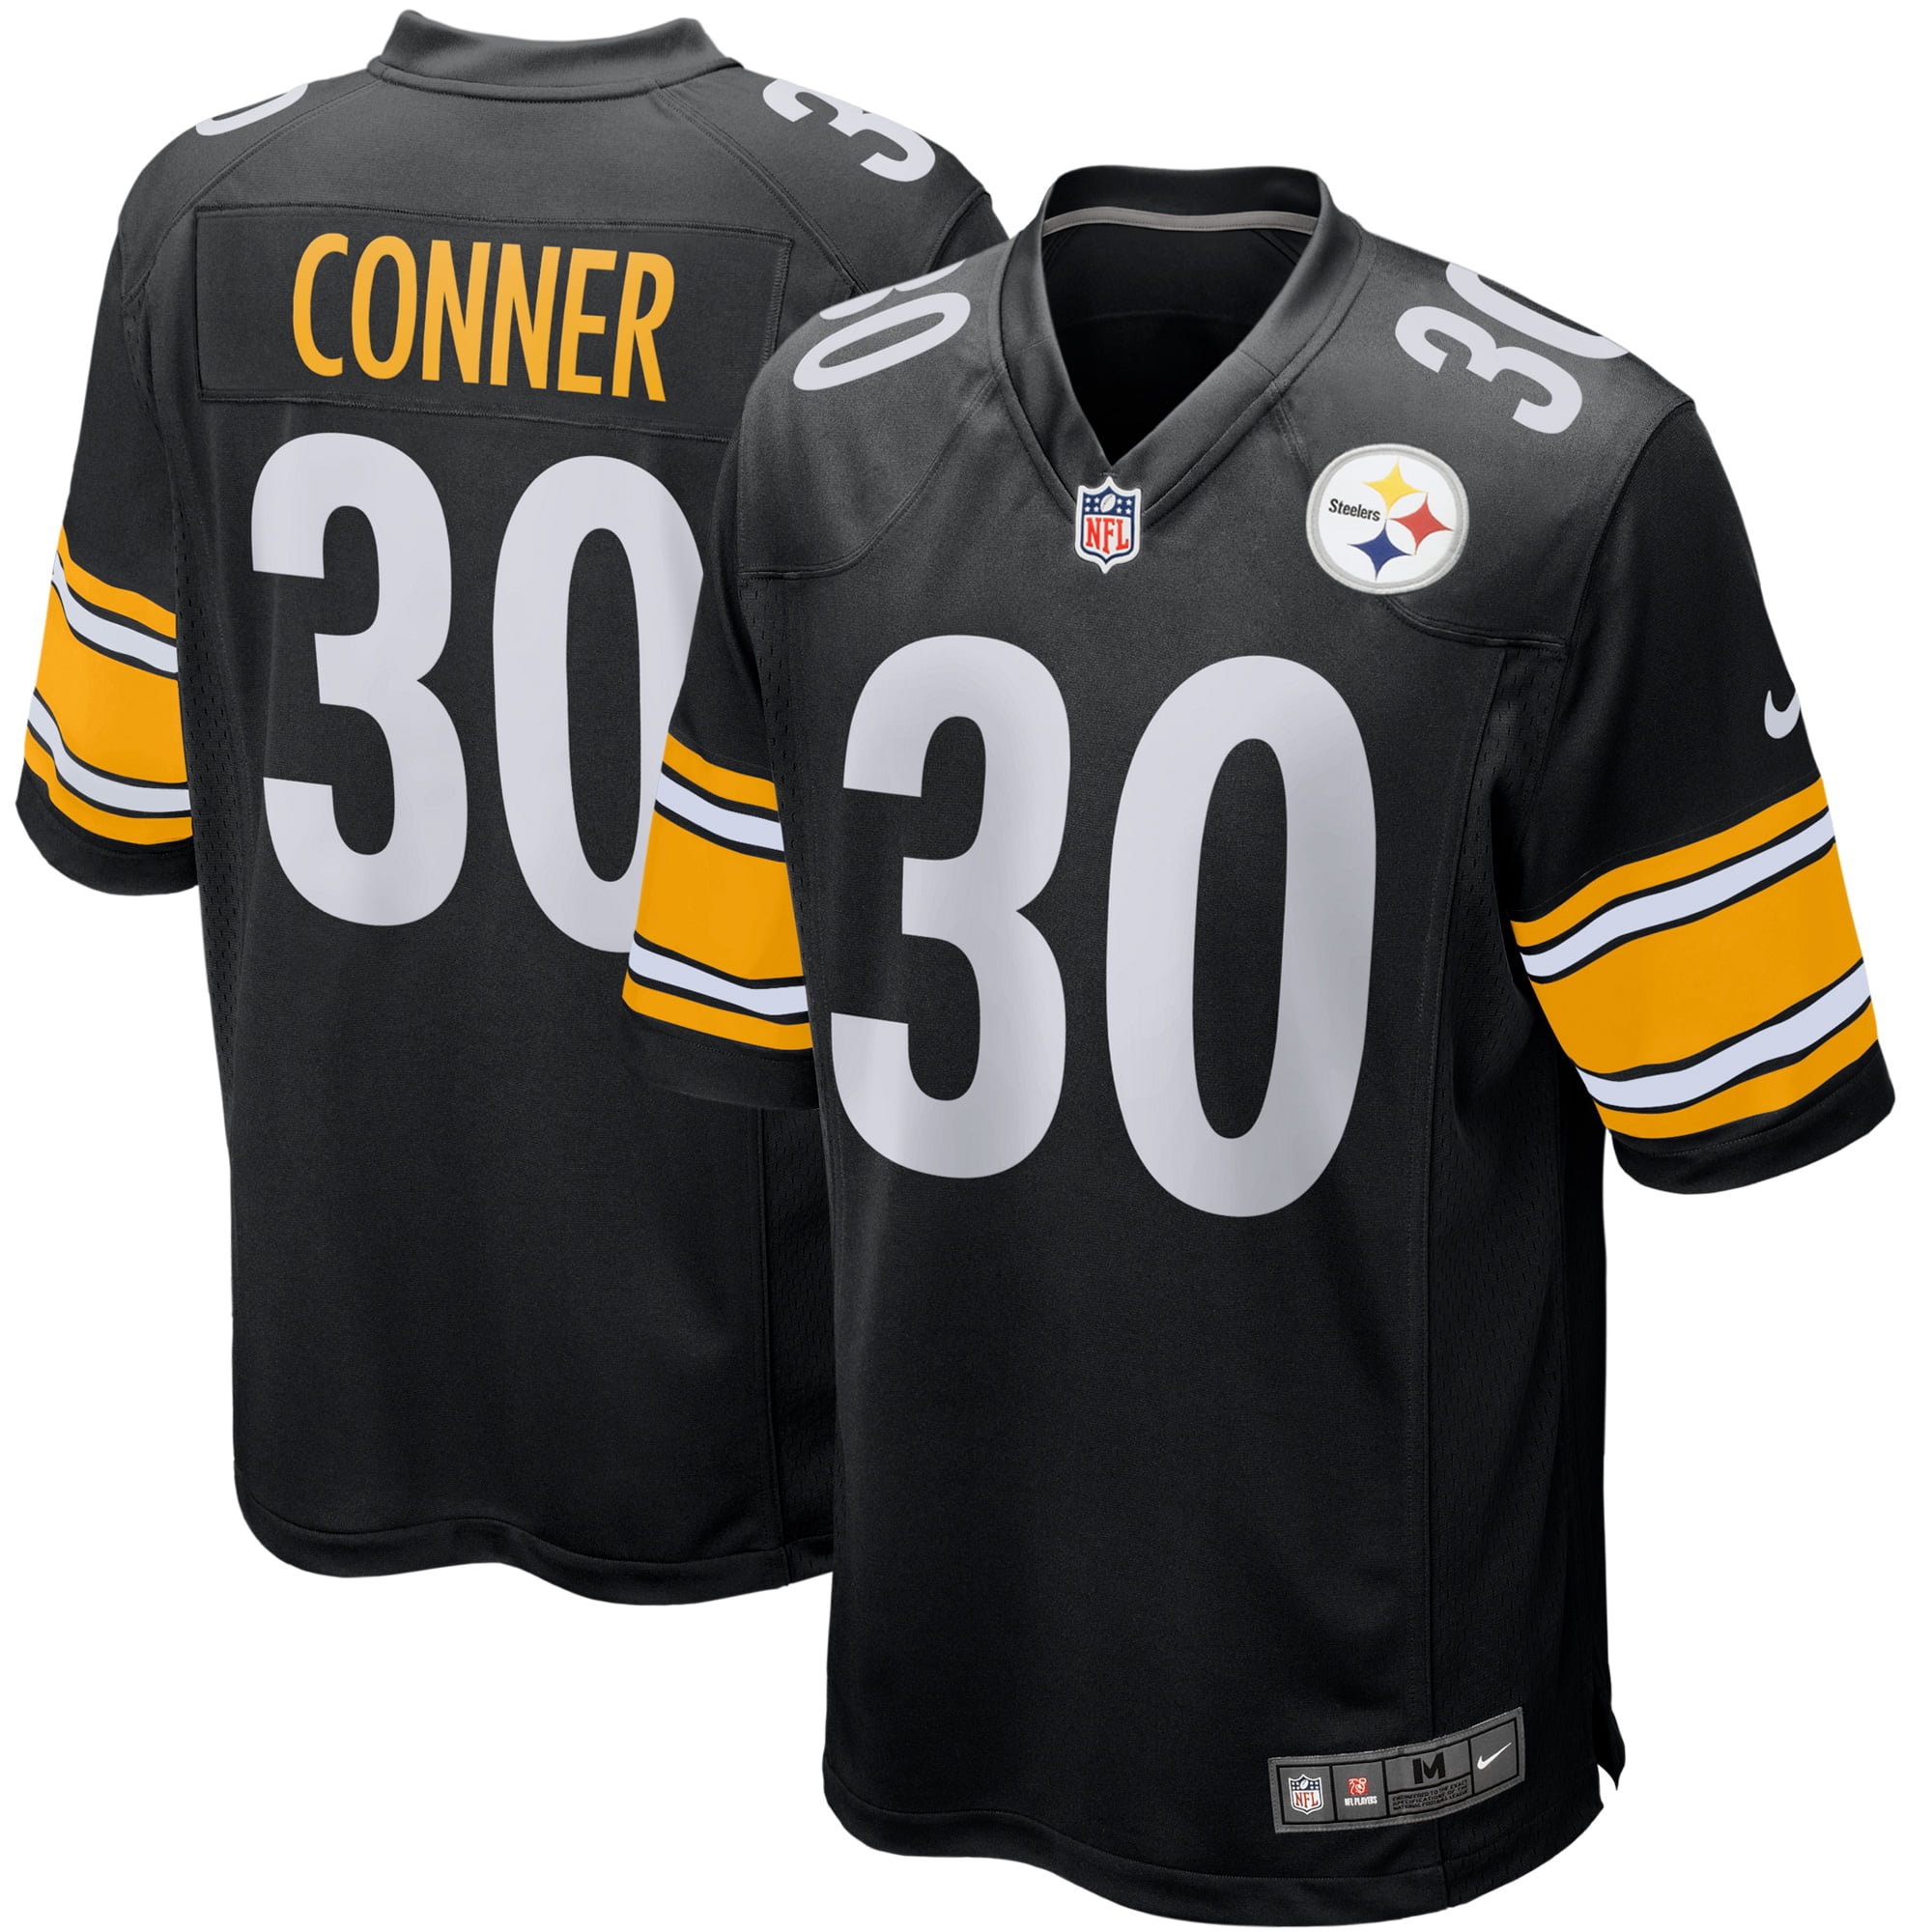 james conner signed jersey